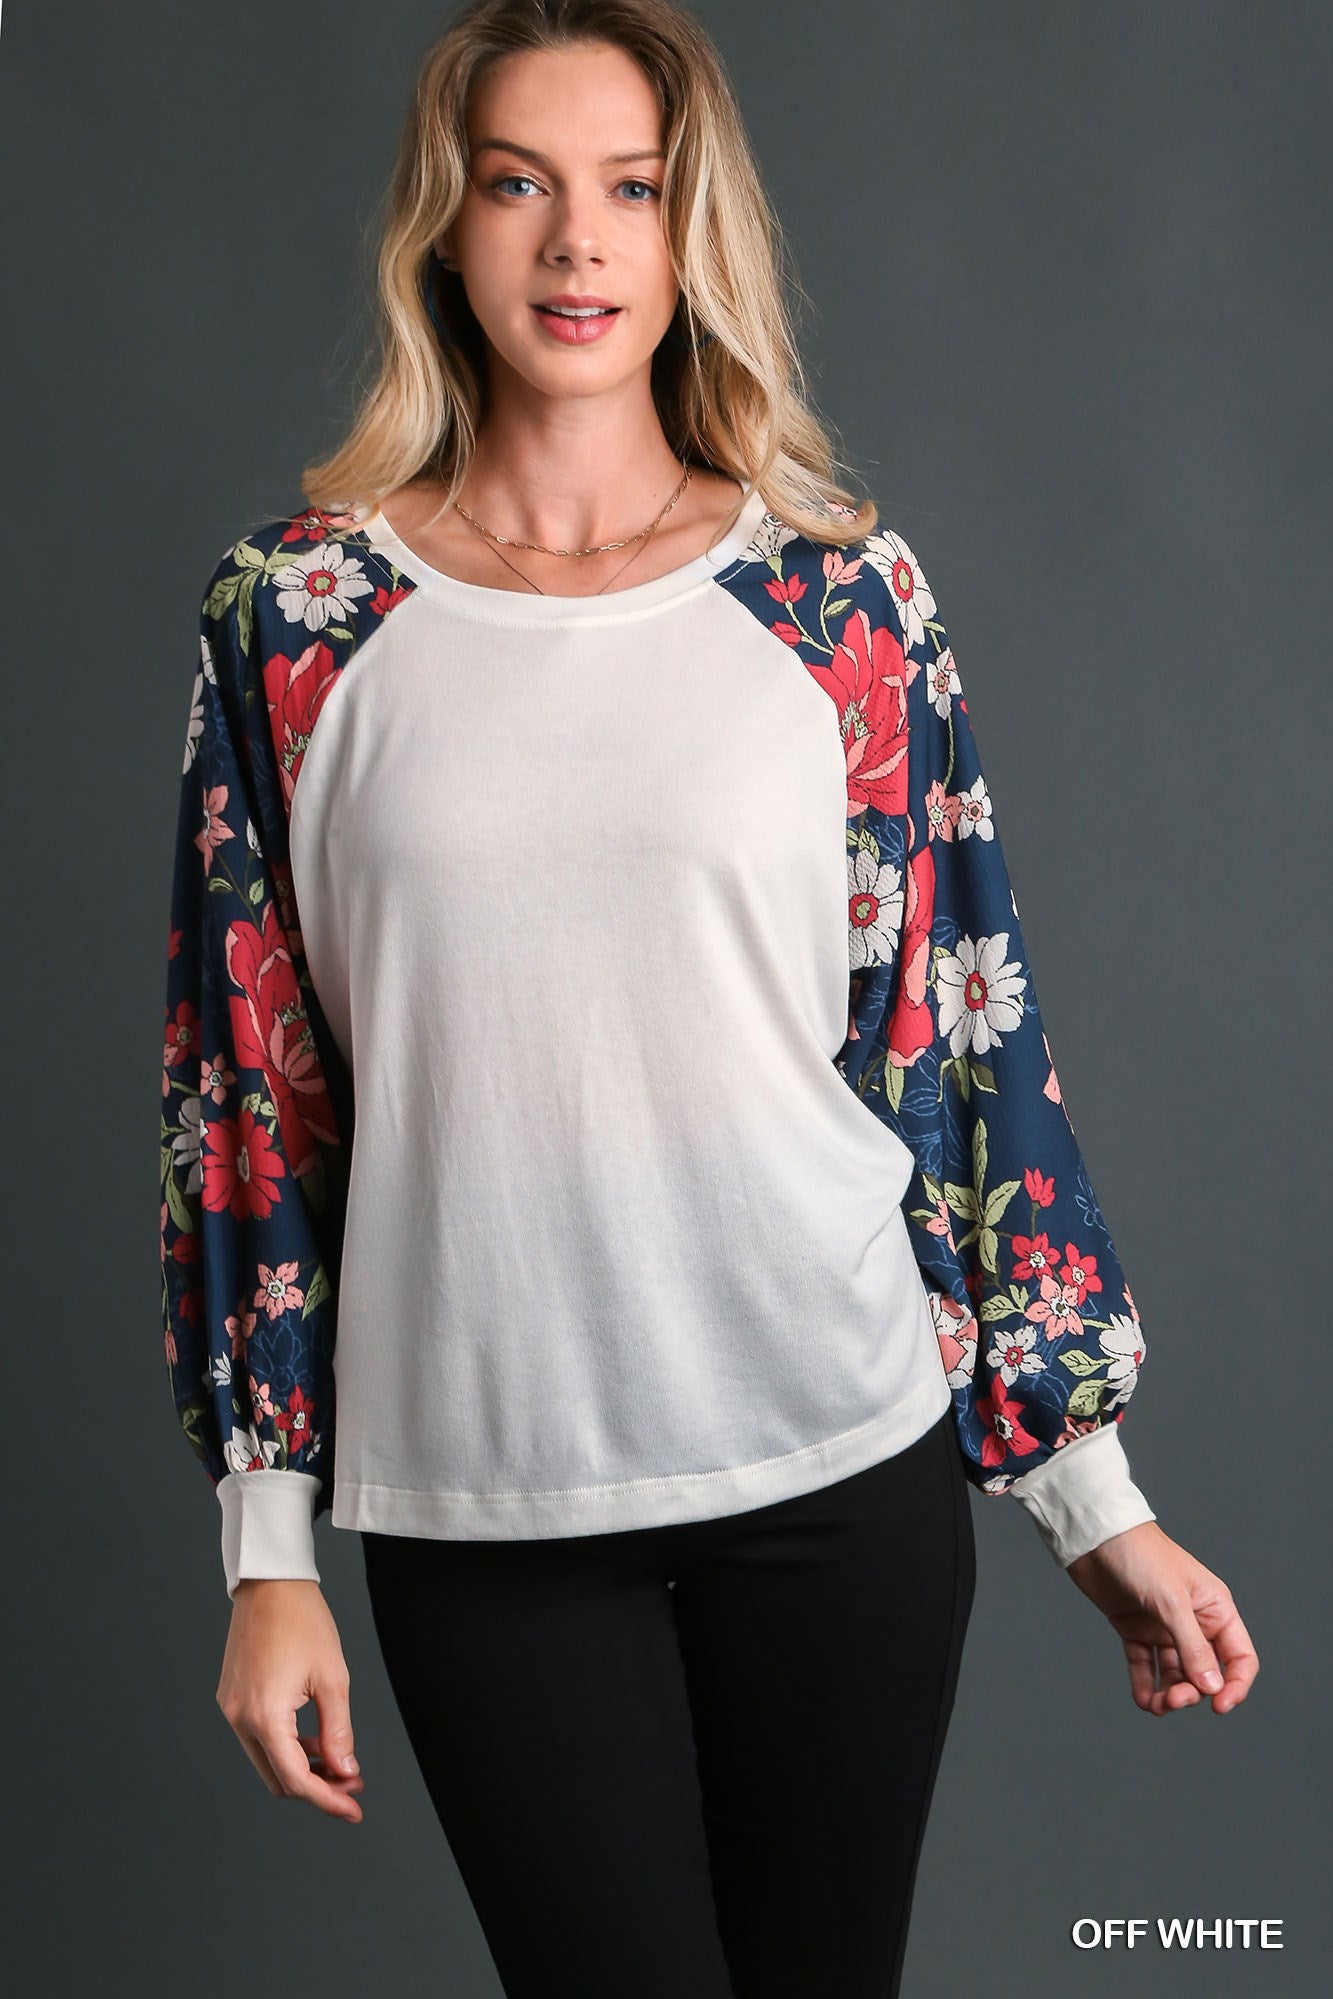 Umgee Mixed Print Long Sleeves Side Slits Round Neck Top - Roulhac Fashion Boutique